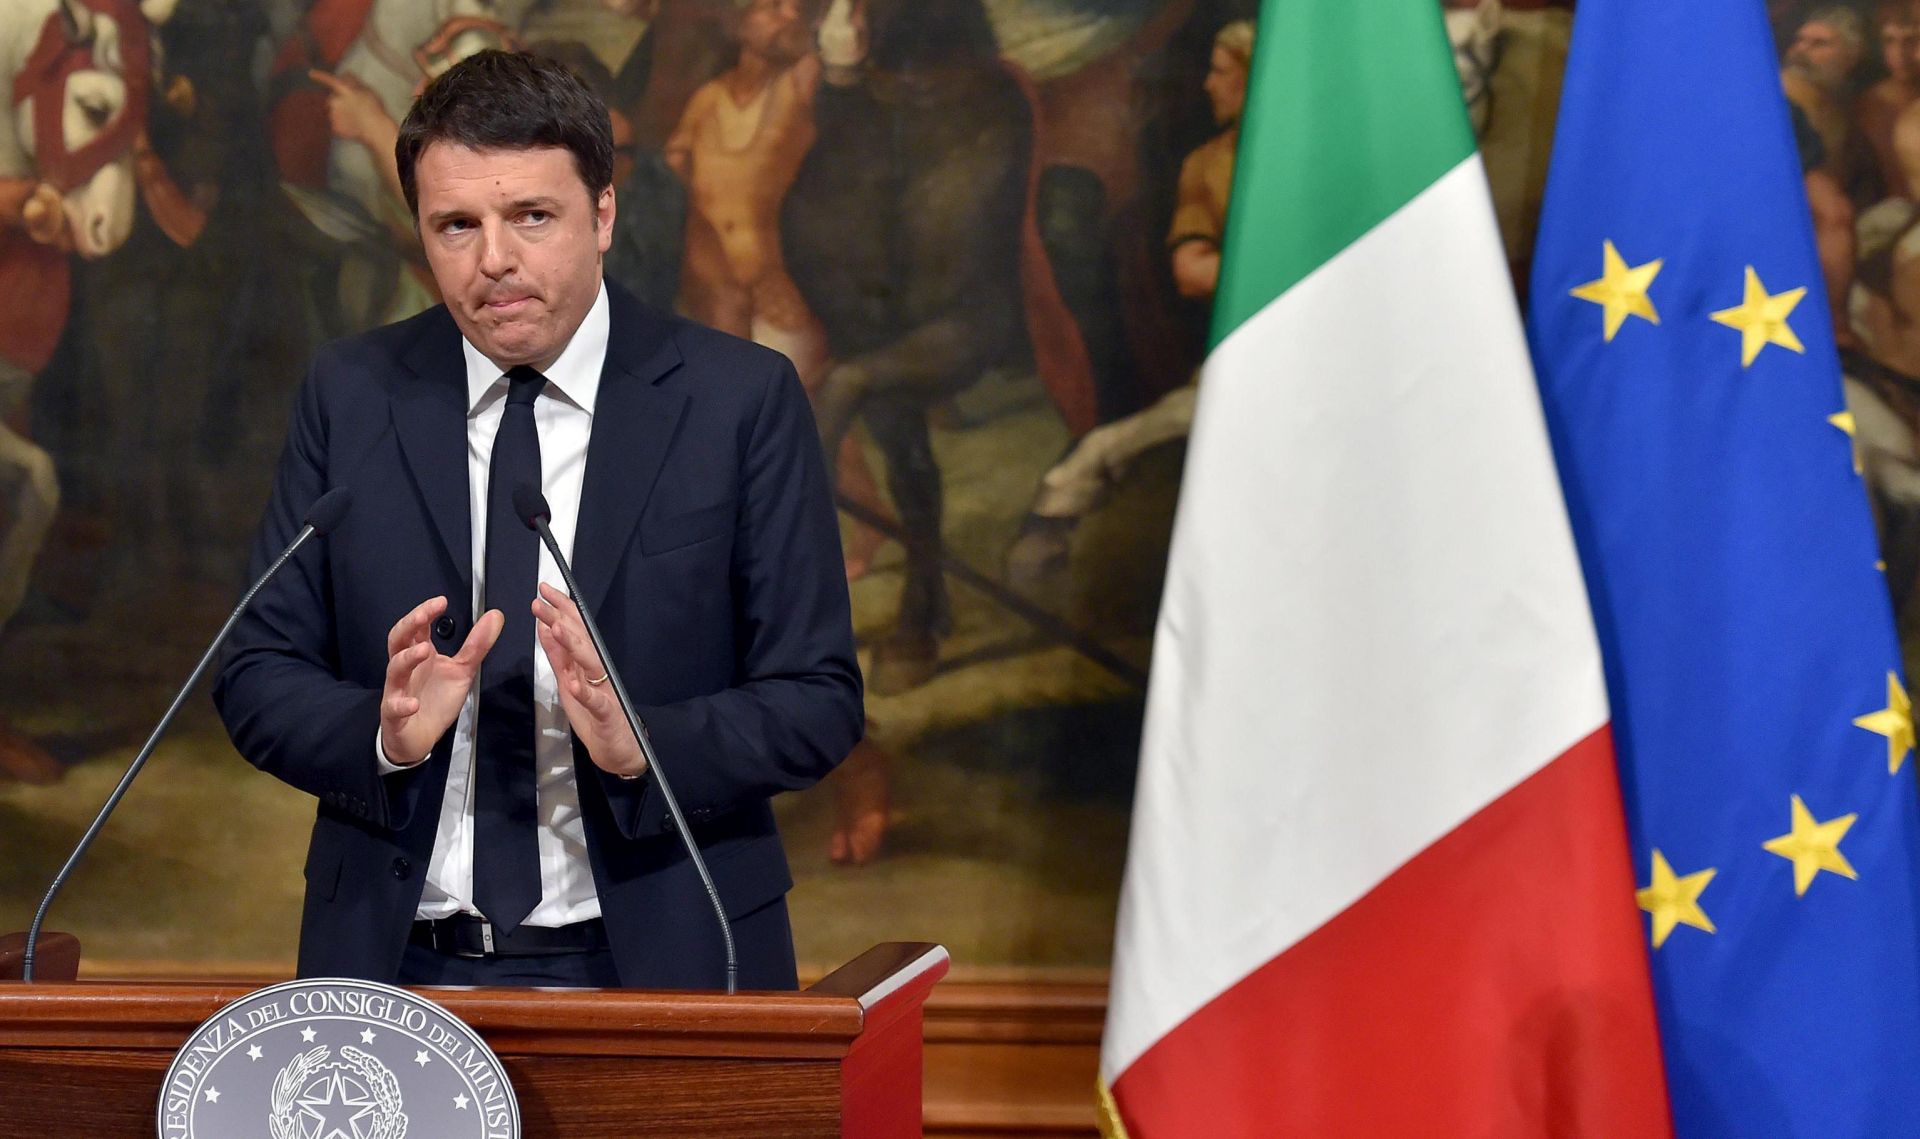 epa05225862 Italian Prime Minister Matteo Renzi during a statement to the press, in response to the terror attacks in Brussels earlier in the day, at Chigi palace Premier's office in Rome, Italy, 22 March 2016. Italy has increased it's security in the wake of the terror attacks that killed many and have left even more injured.  EPA/ETTORE FERRARI